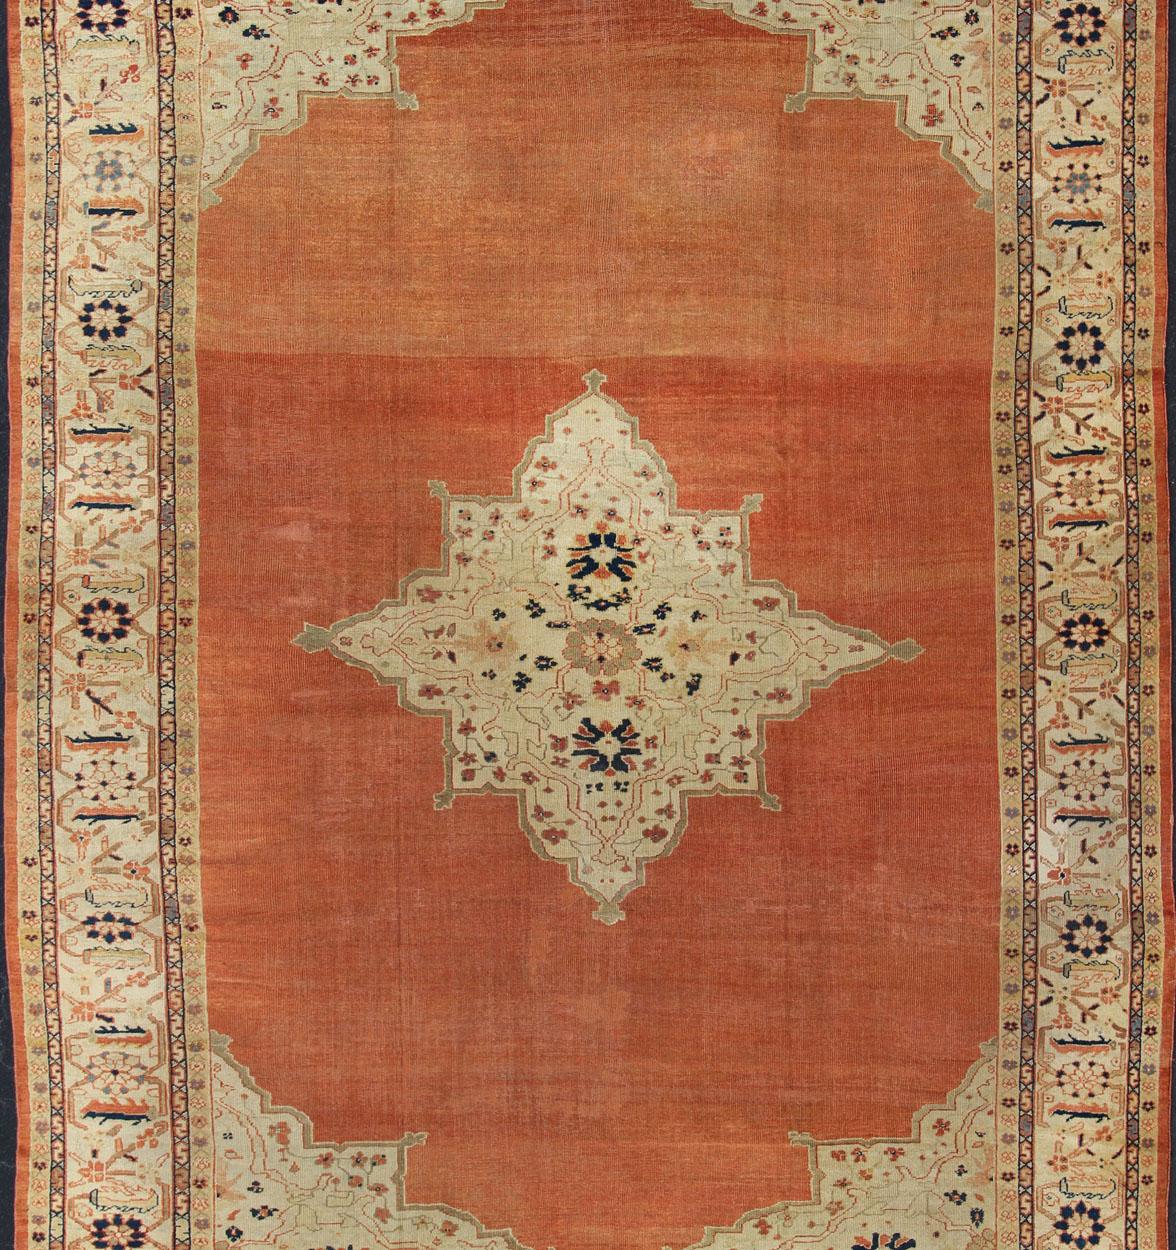 Large Antique Ziegler Sultanabad rug with central medallion in soft orange, ivory and pops of navy blue. Keivan Woven Arts / E-1207. Antique Ziegler, antique Persian Ziegler.
Measures: 10'2 x 14'5
This striking antique Ziegler Sultanabad carpet